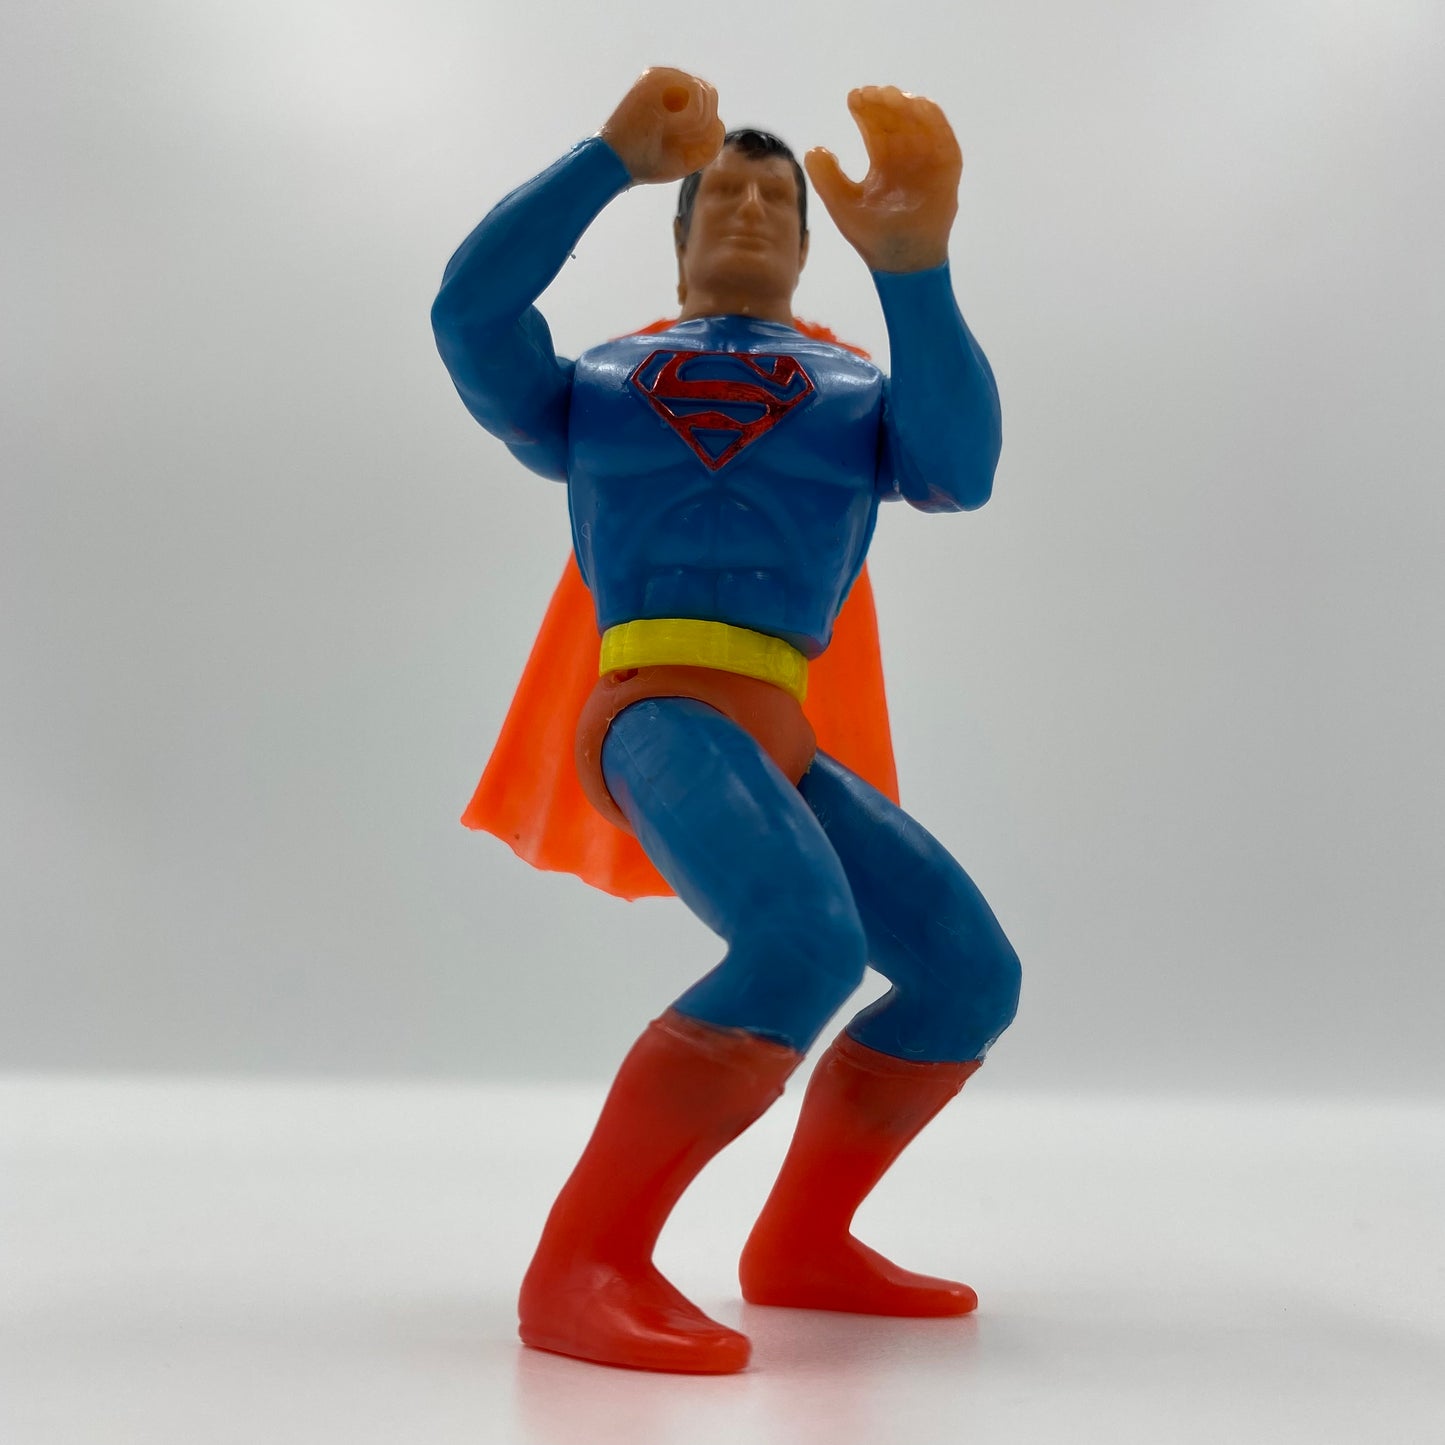 Comic Action Heroes Superman 3.75 loose action figure (1976) Mego